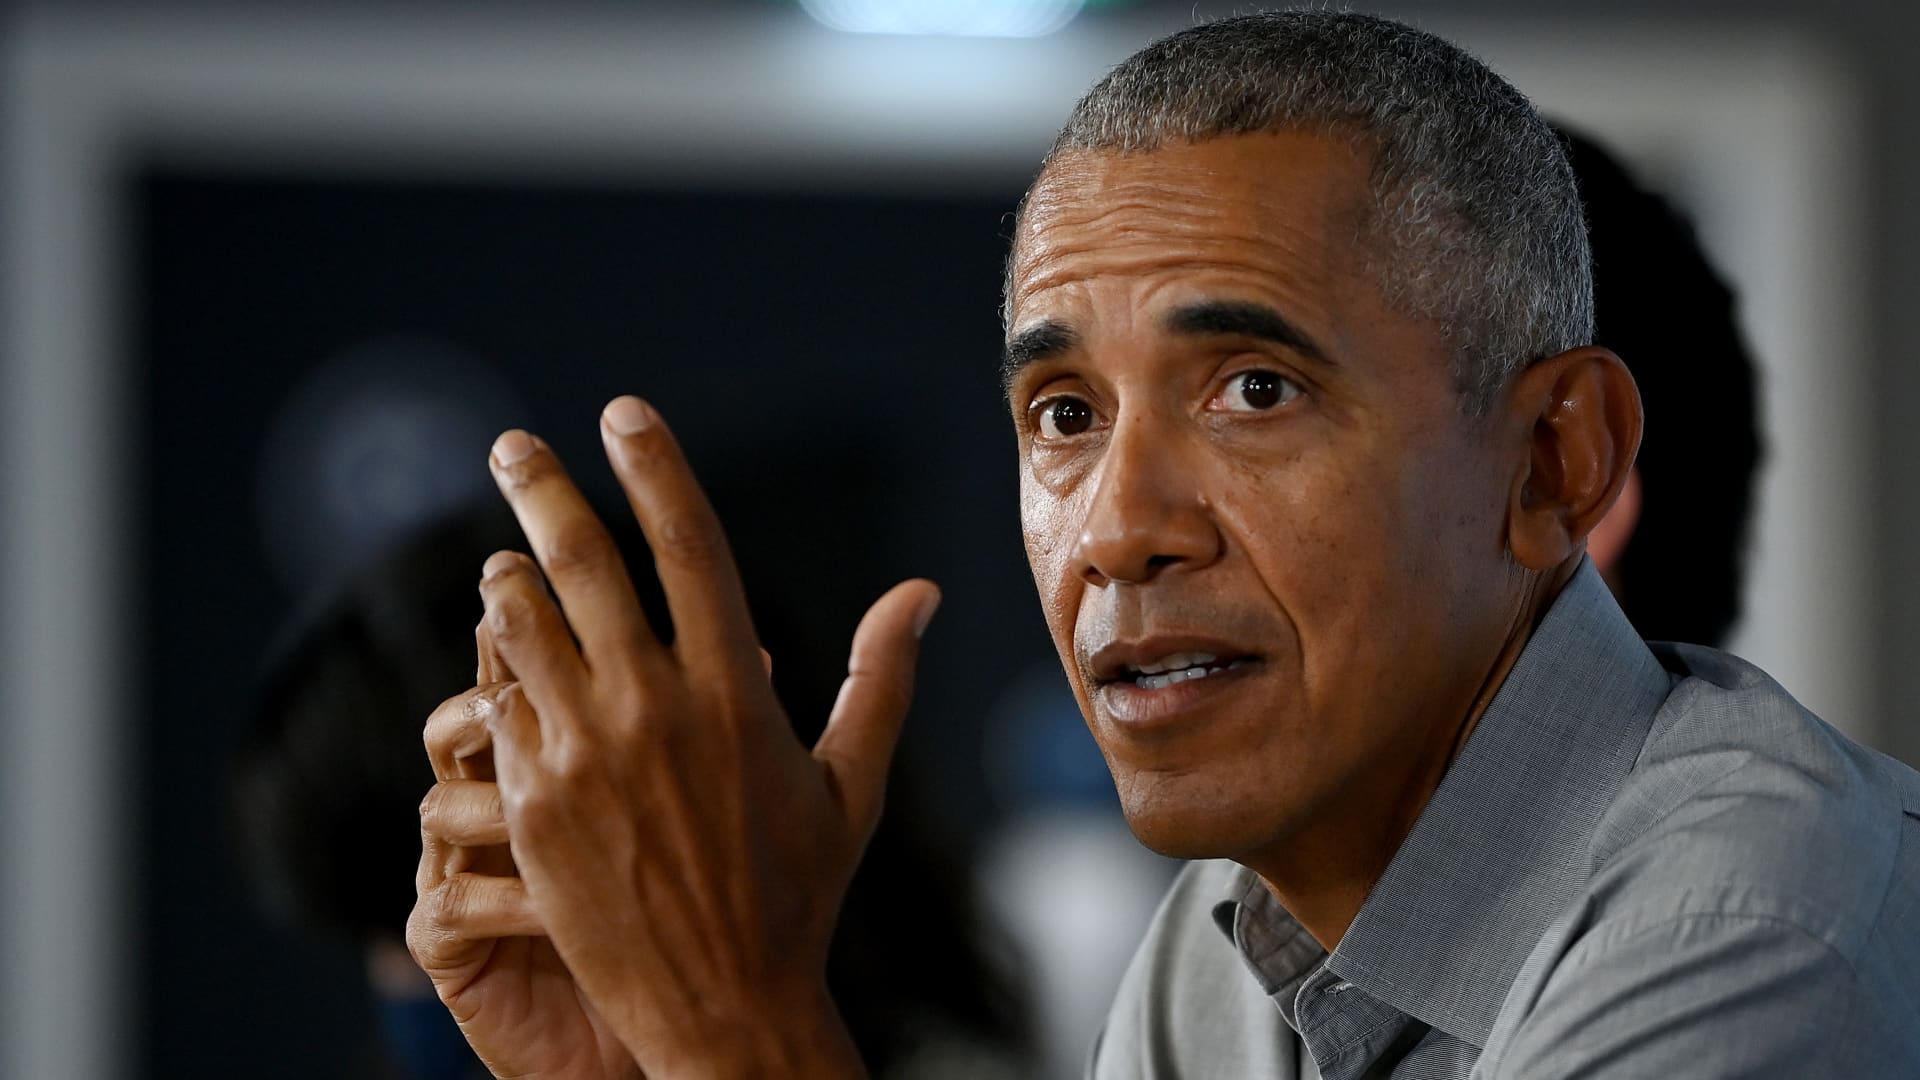 Obama calls for tech regulation to combat disinformation on social media – CNBC